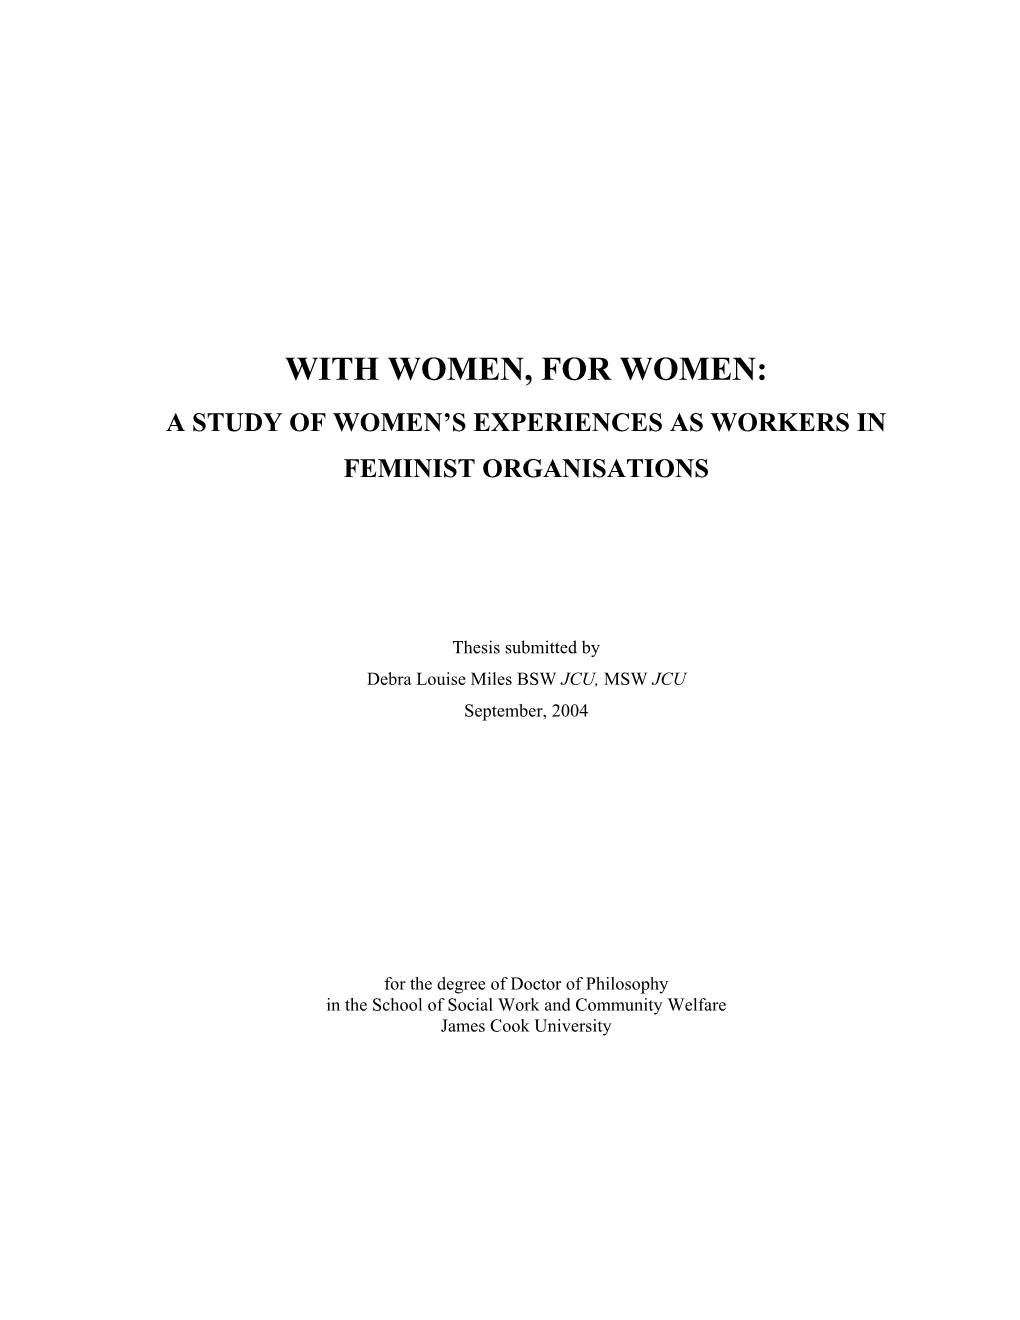 With Women, for Women: a Study of Women’S Experiences As Workers in Feminist Organisations